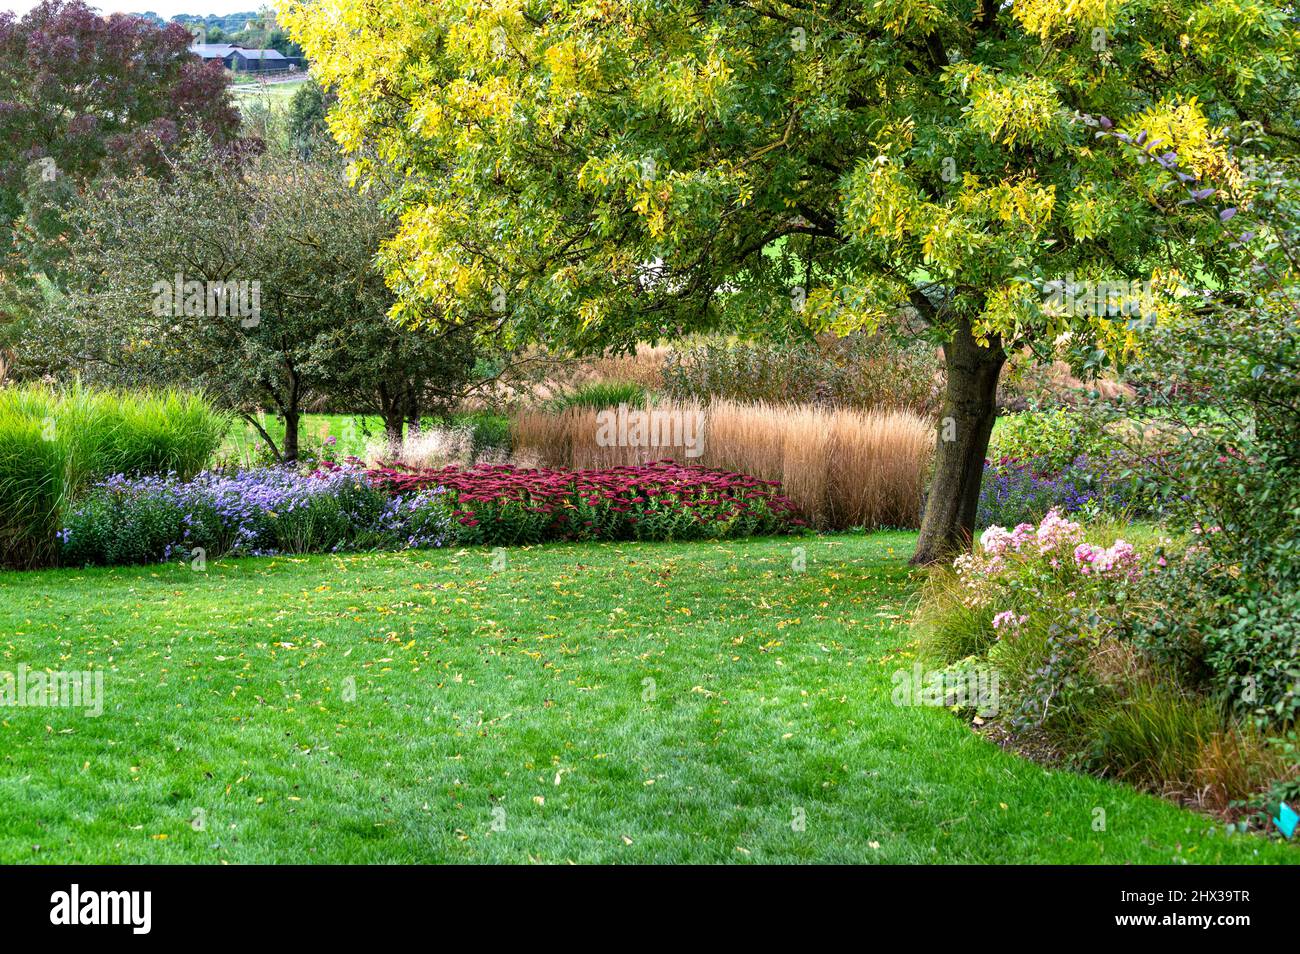 Mixed borders of shrubs, trees, and perennials, showing a lot of interest and colour in autumn. Stock Photo